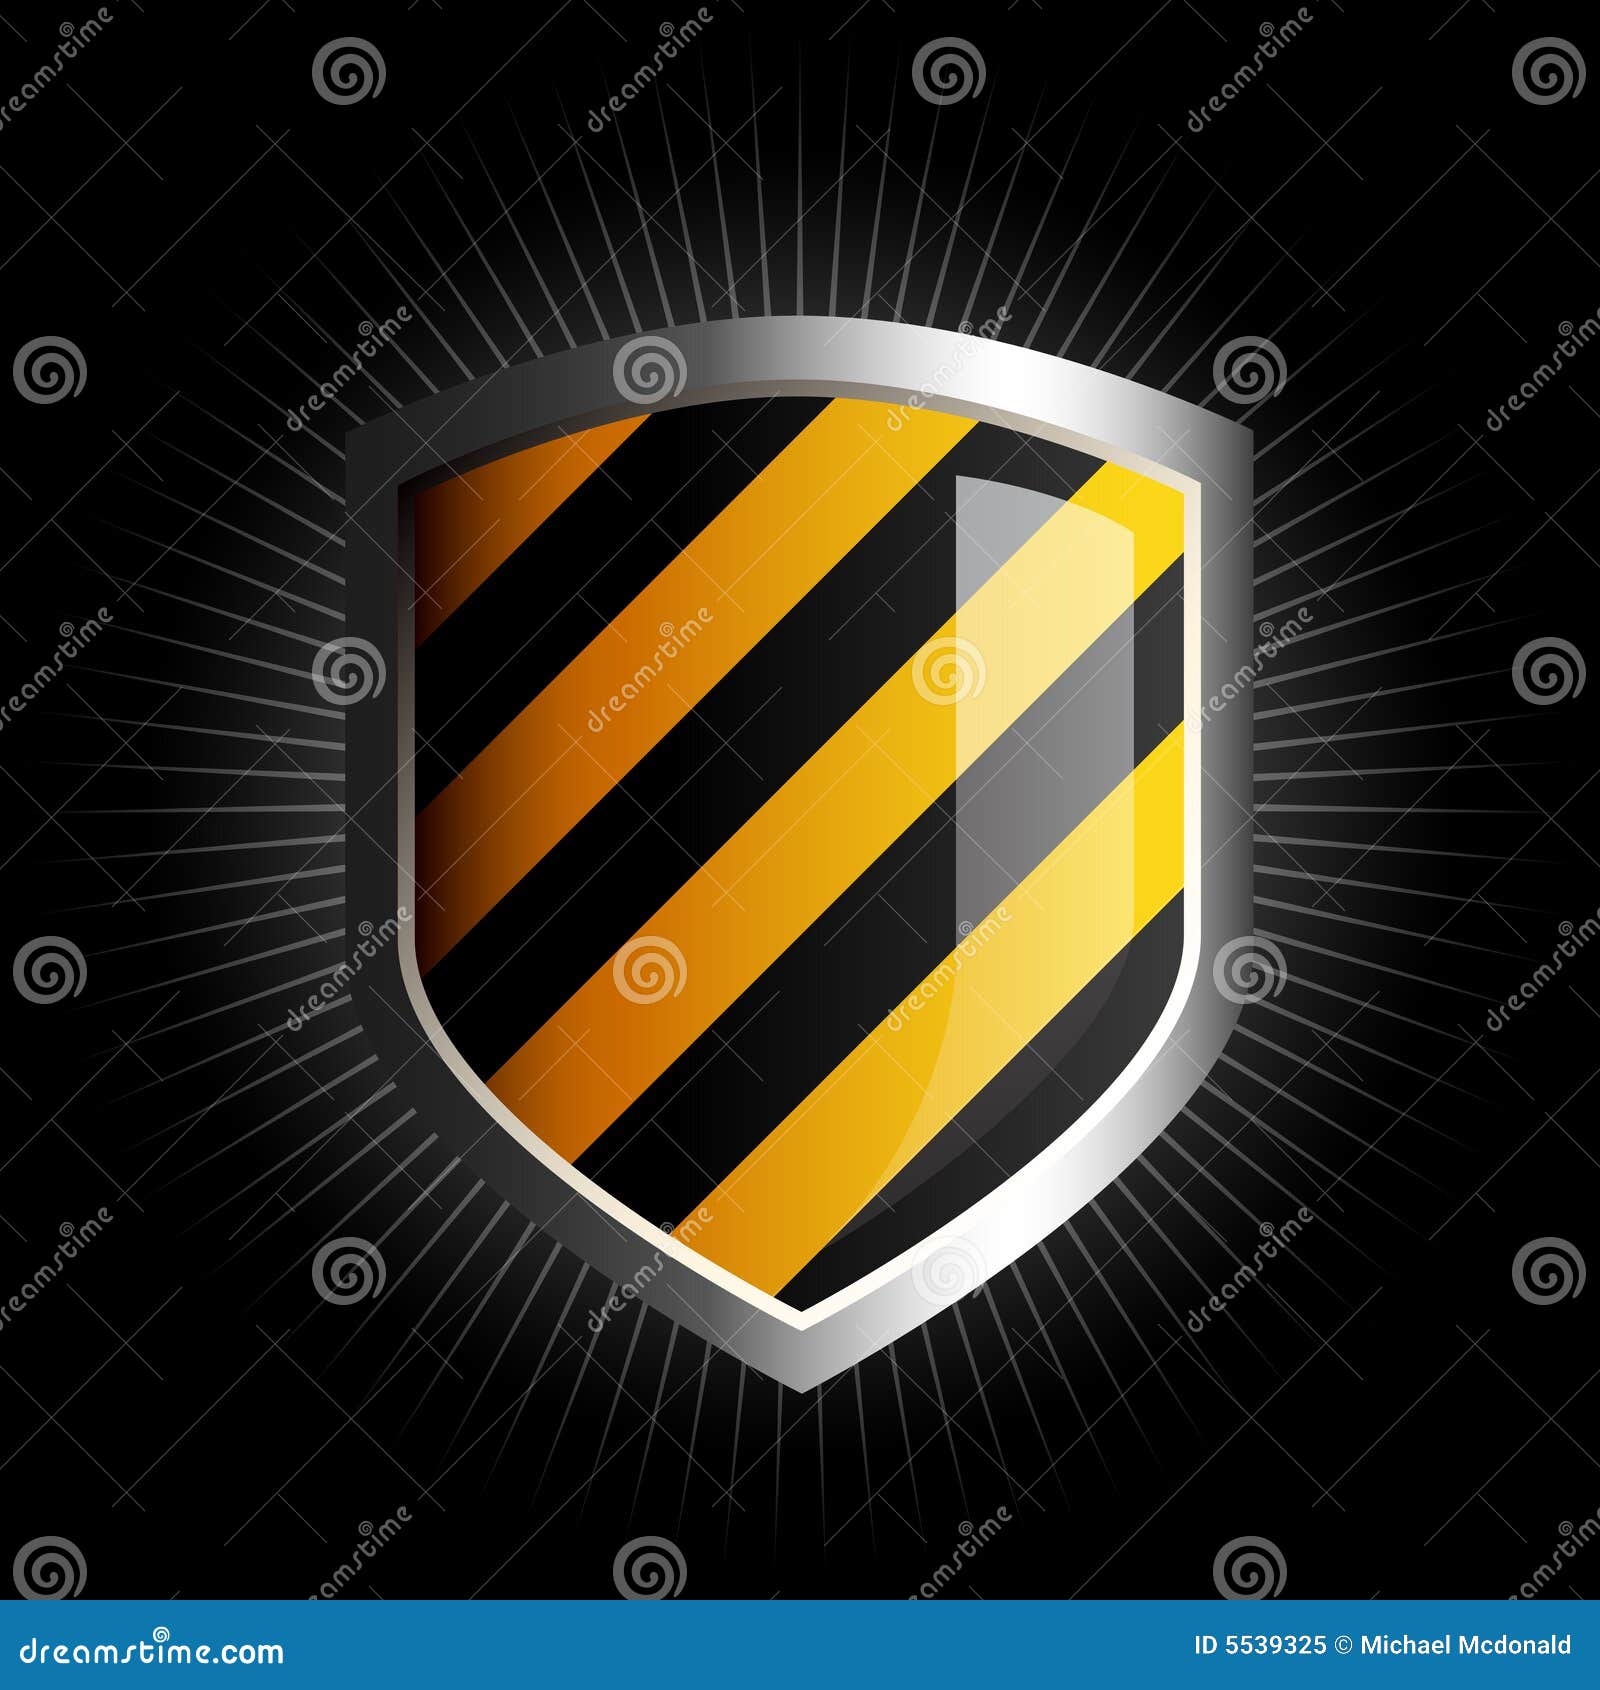 Glossy black and yellow shield emblem with starburst background